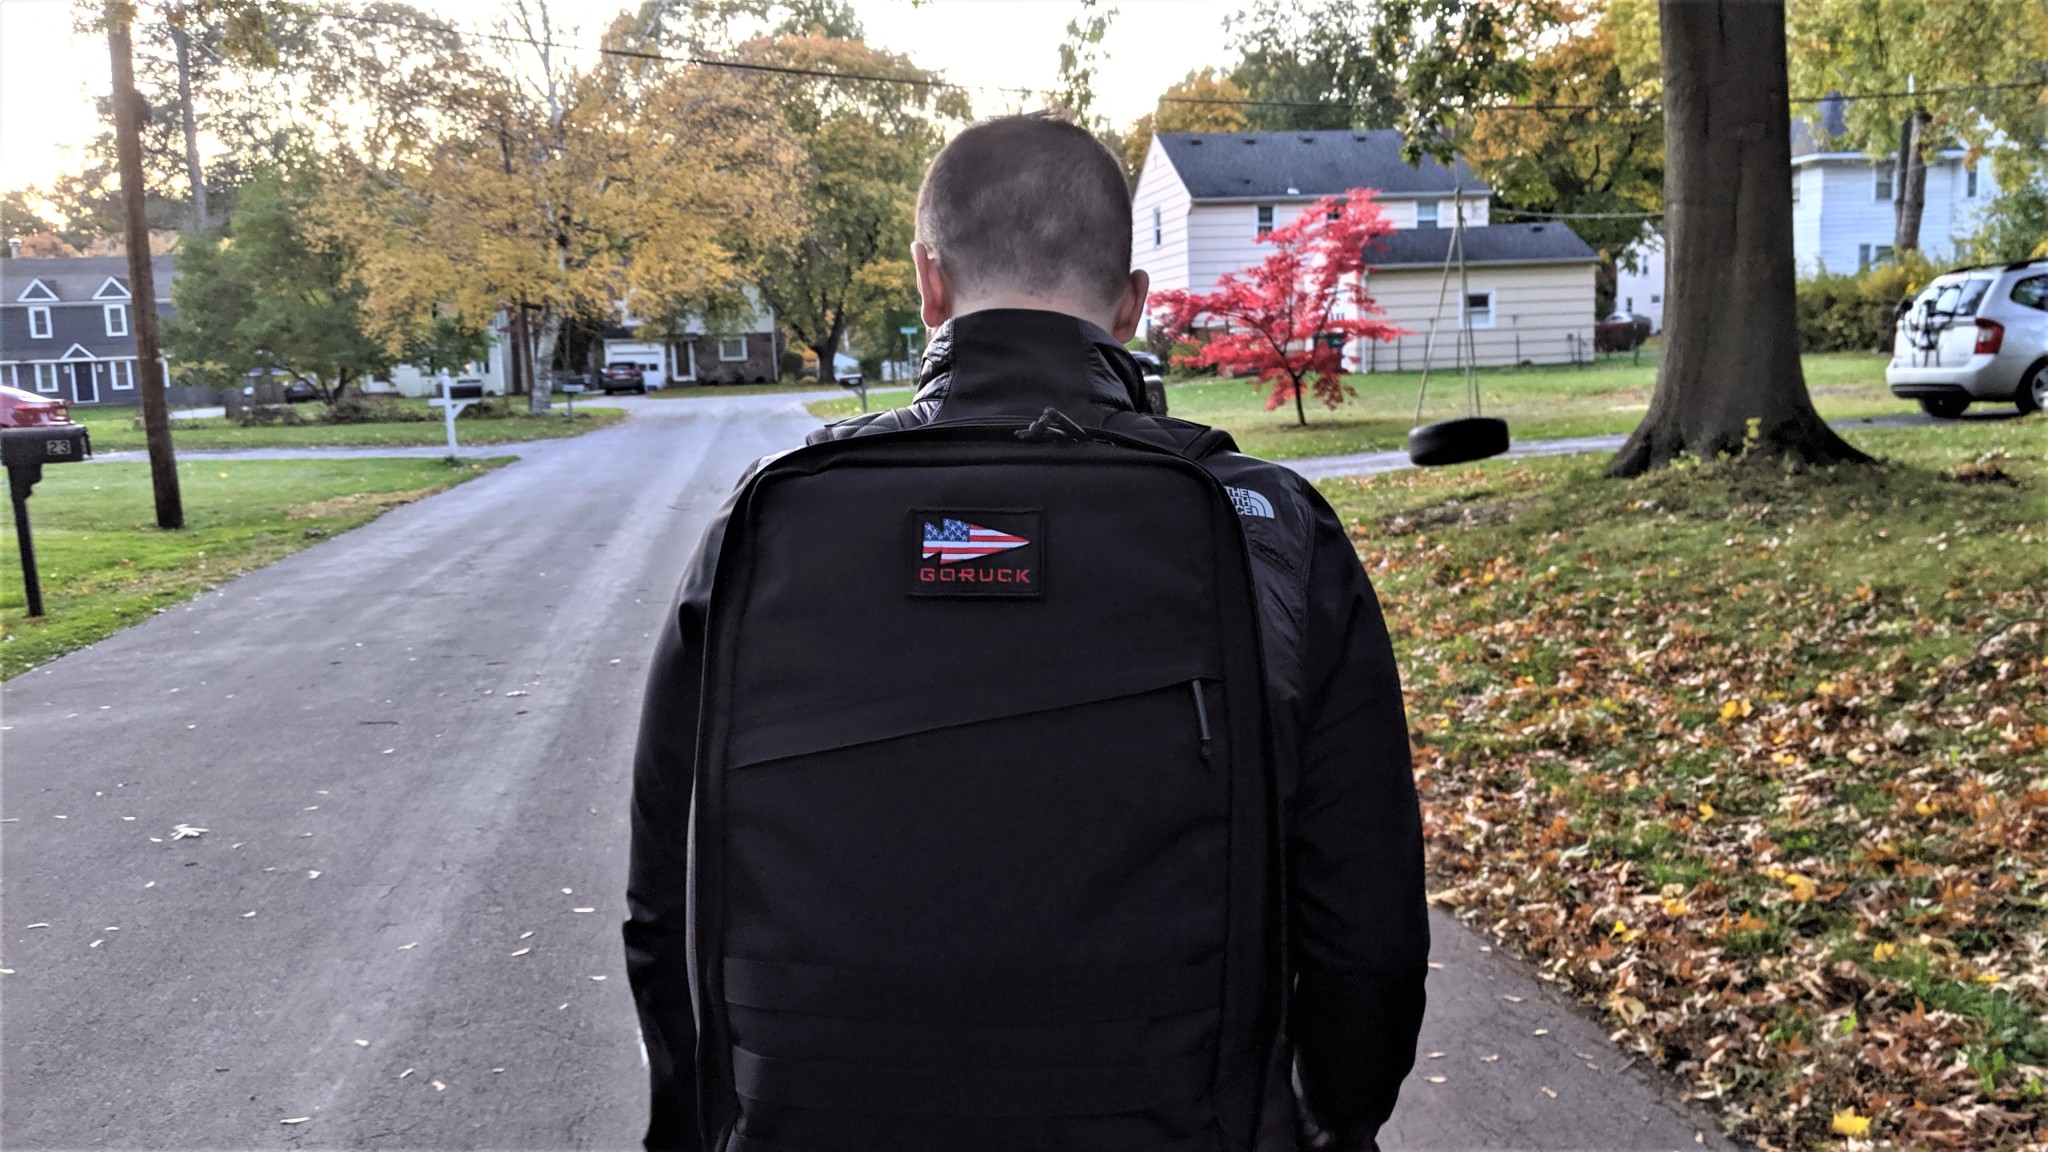 goruck gr1 review wearing on back with patch